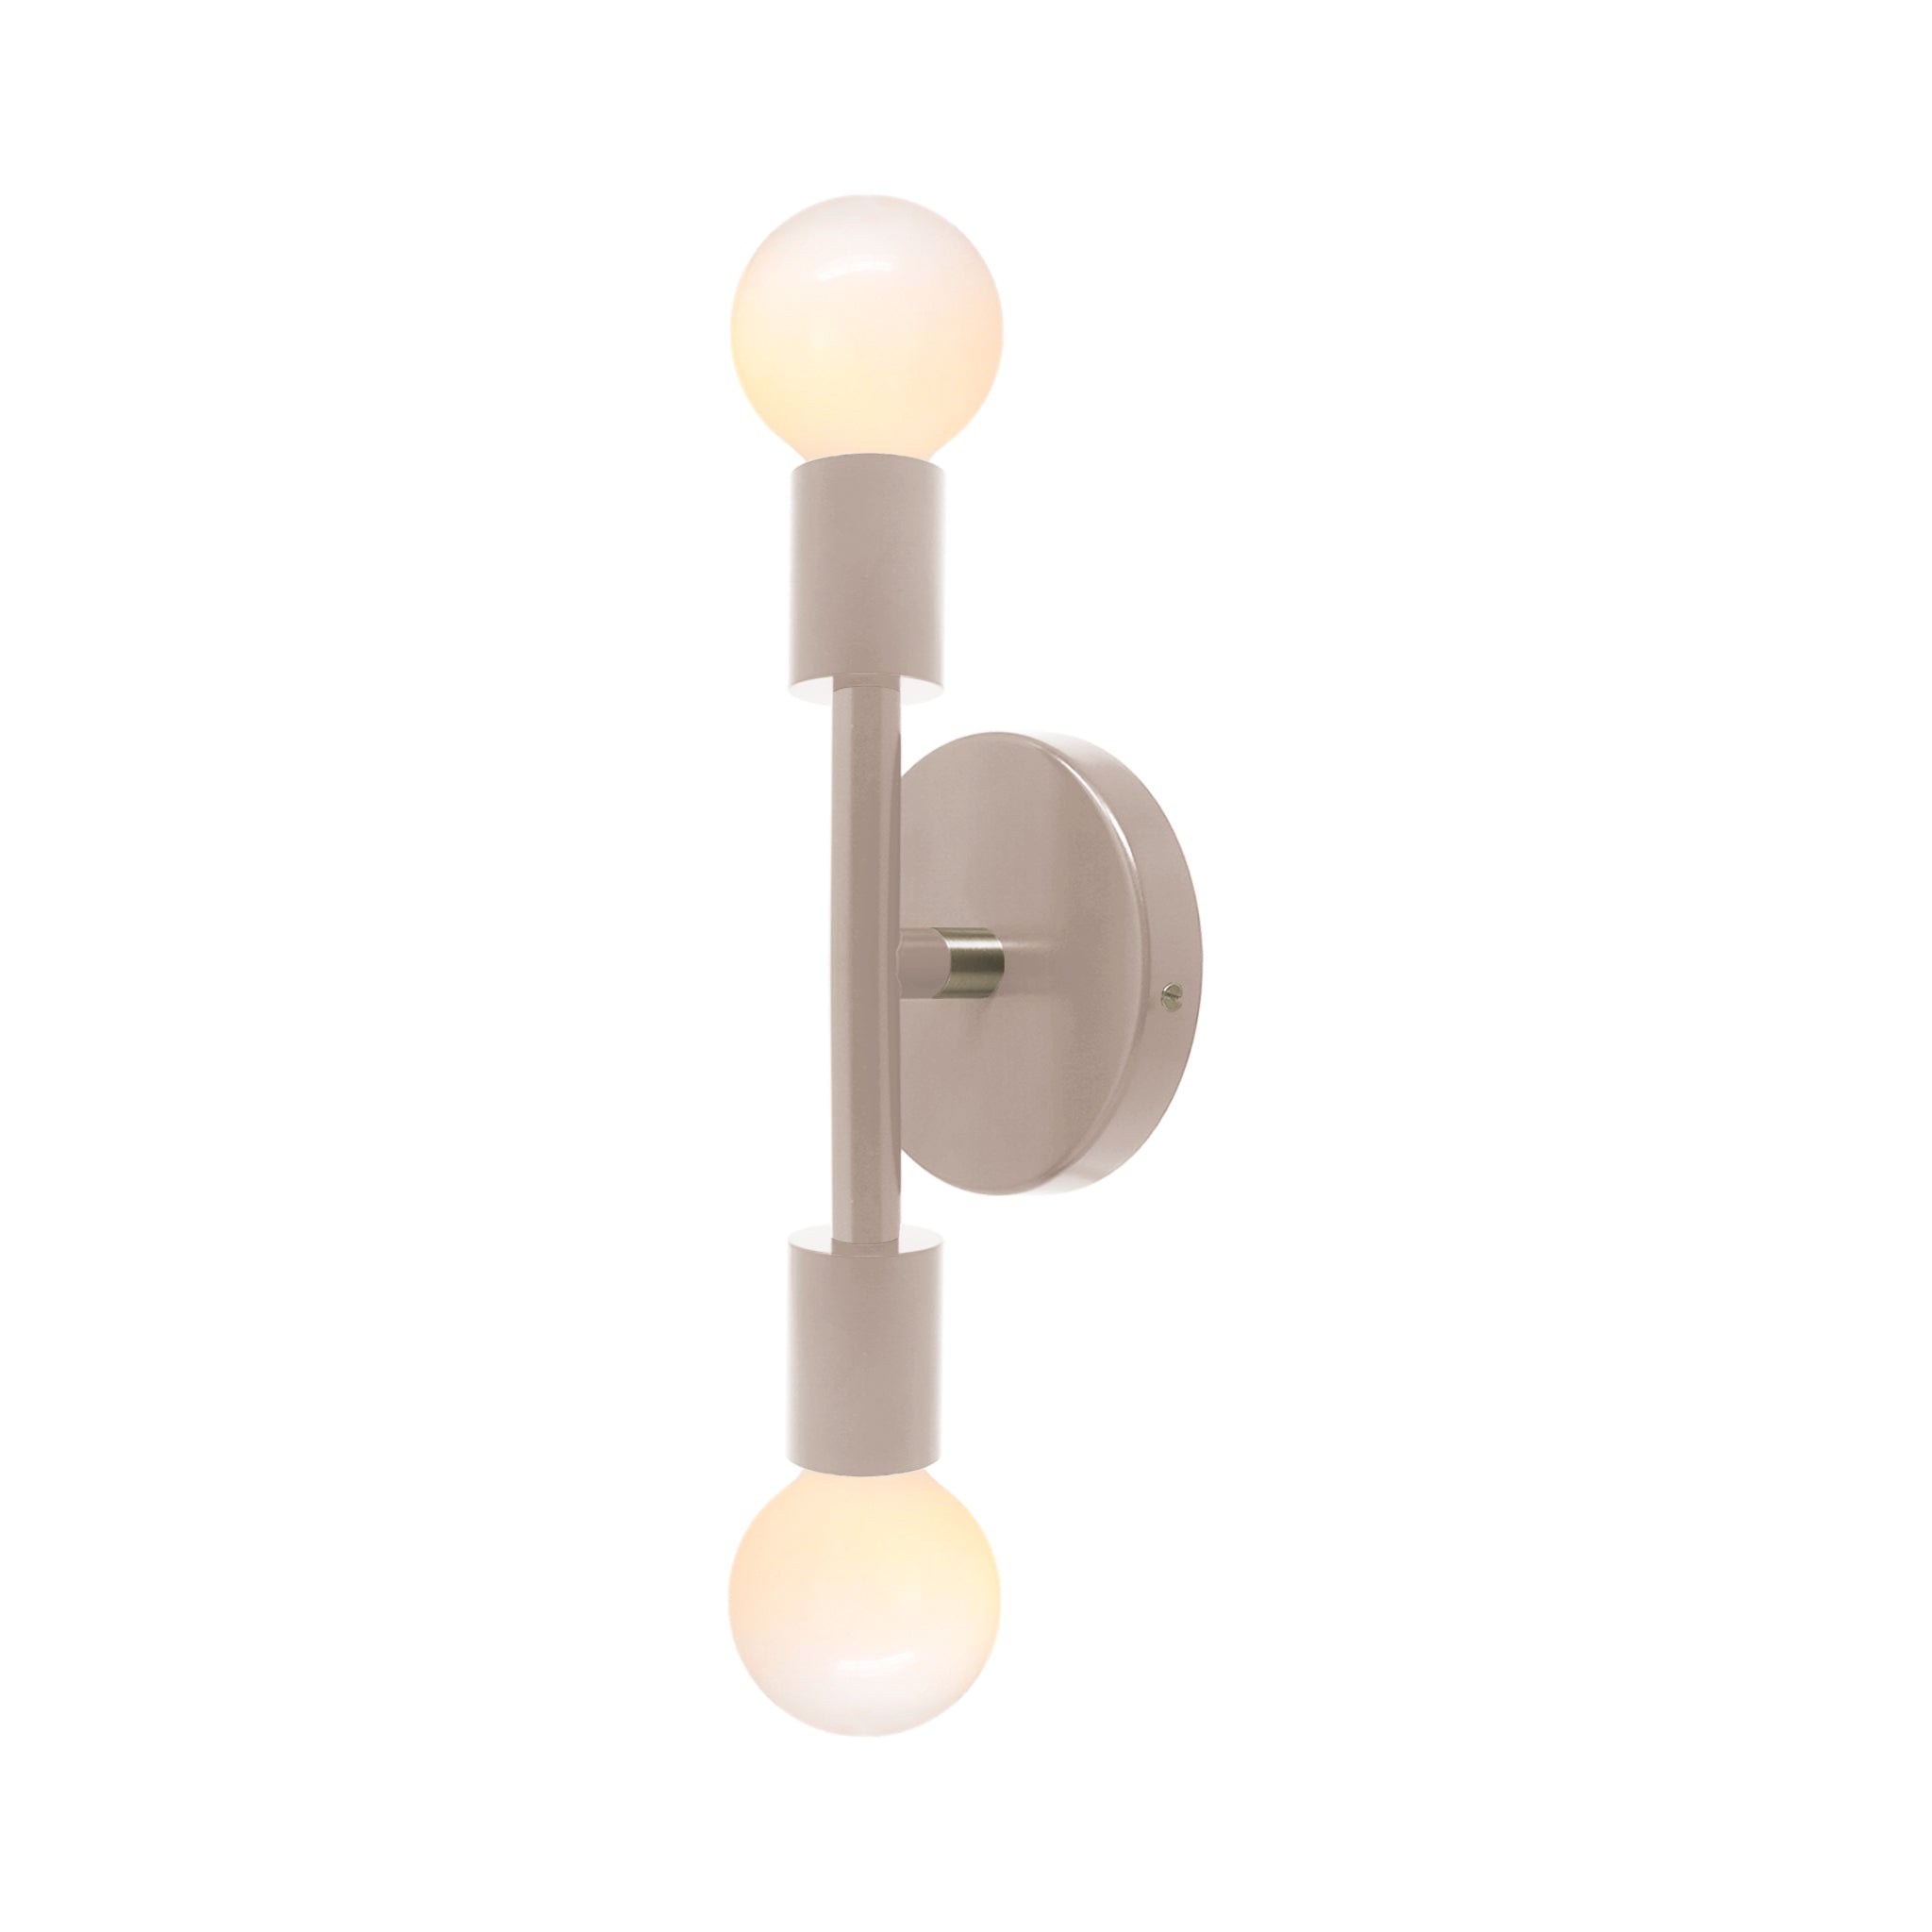 Nickel and chalk color Pilot sconce 11" Dutton Brown lighting